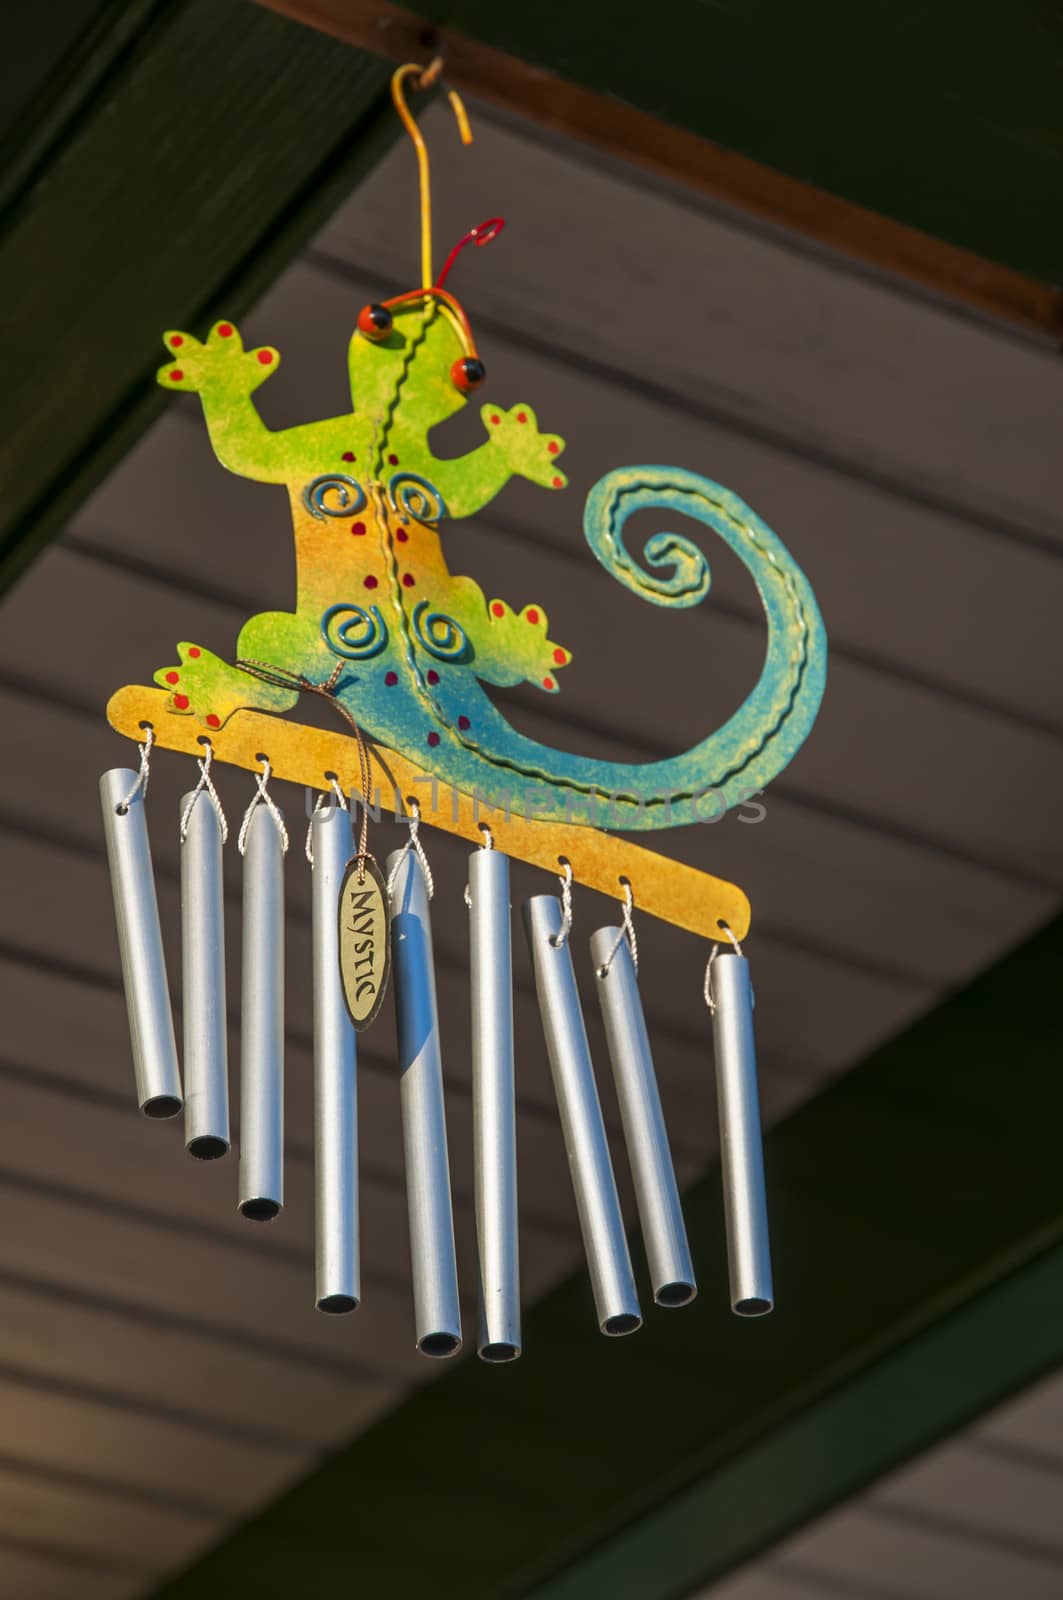 Decorative objects of a lizard with iron pipes